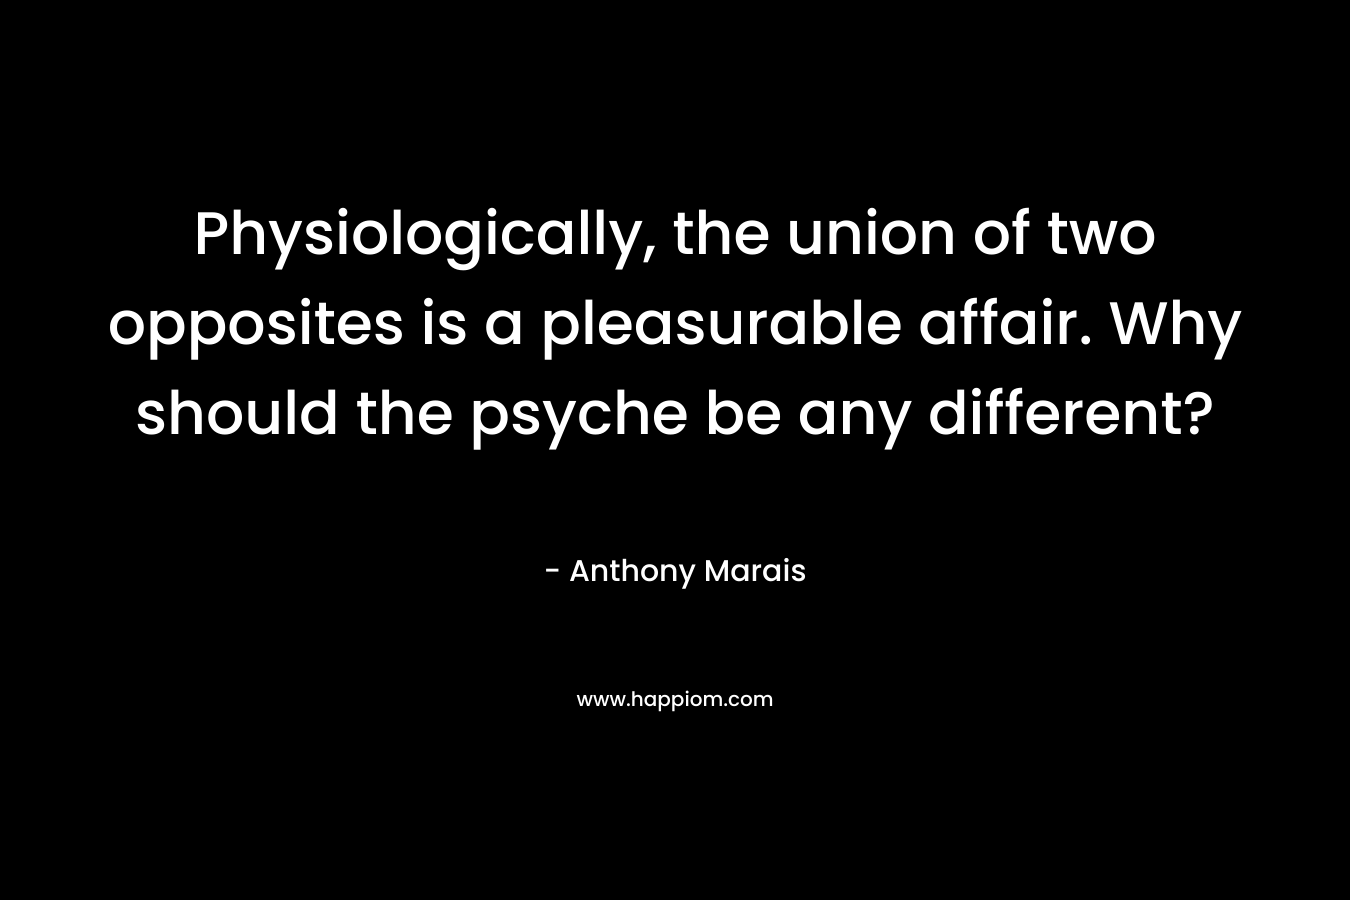 Physiologically, the union of two opposites is a pleasurable affair. Why should the psyche be any different?